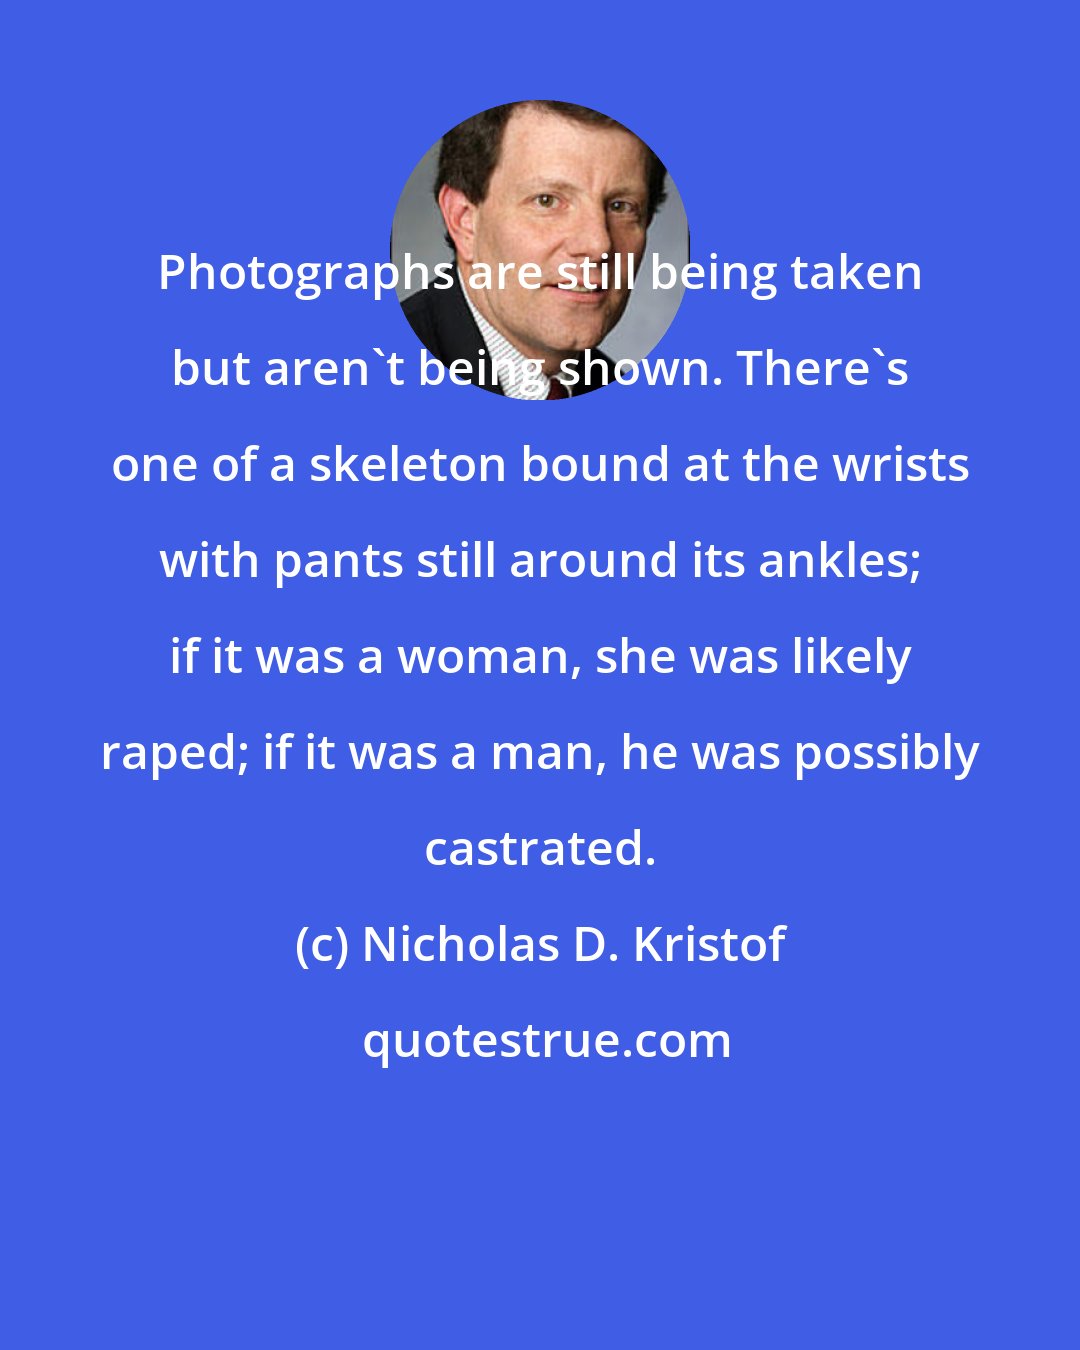 Nicholas D. Kristof: Photographs are still being taken but aren't being shown. There's one of a skeleton bound at the wrists with pants still around its ankles; if it was a woman, she was likely raped; if it was a man, he was possibly castrated.